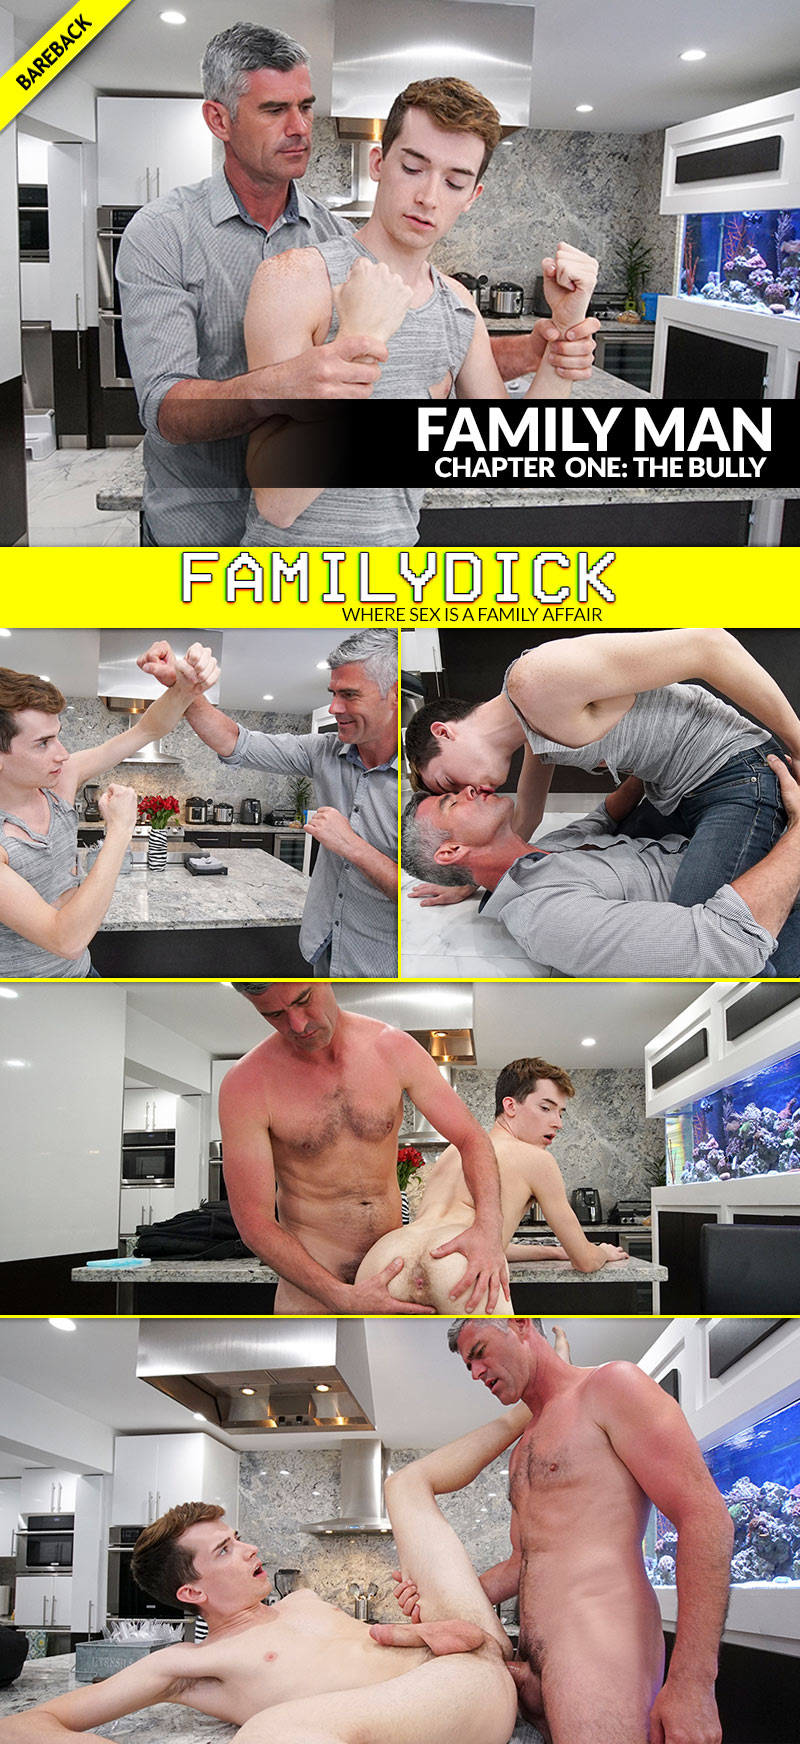 Family Man: The Bully, Chapter One (with Alex Meyer and Bill) at FamilyDick